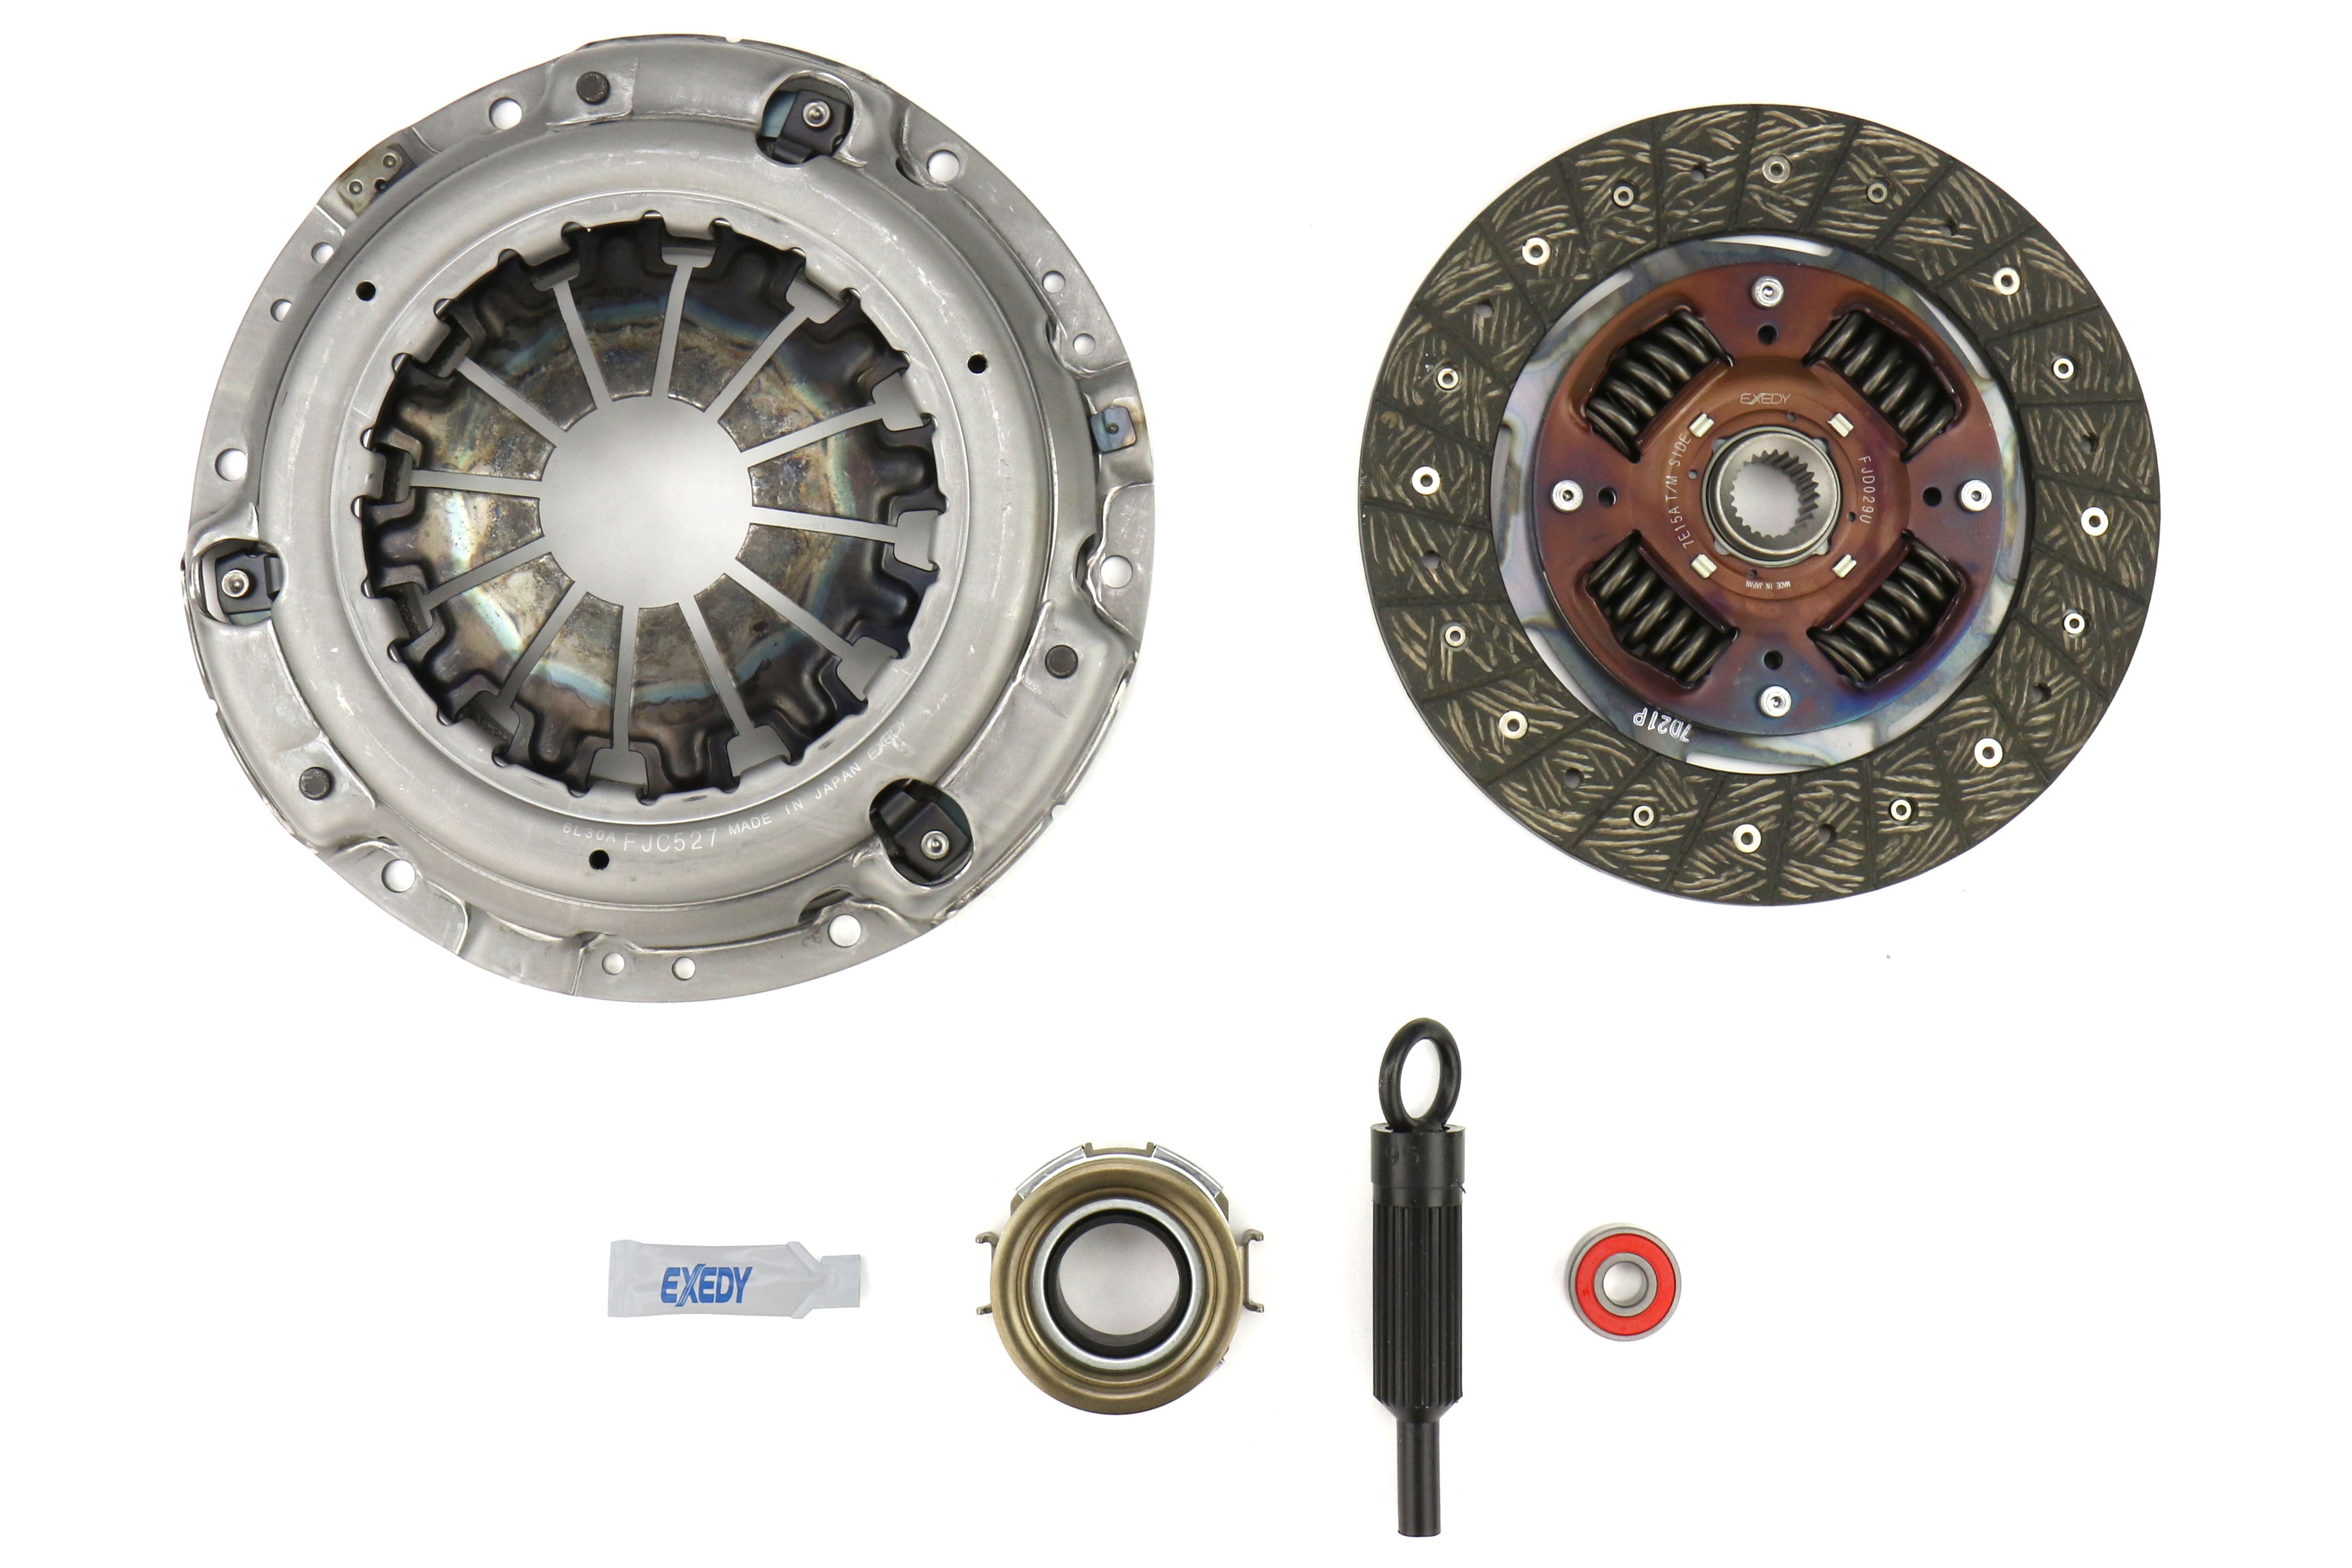 Exedy OEM Replacement Clutch Kit - Subaru Models (inc. 2010-2017 Legacy  2.5i / 2014-2018 Forester)